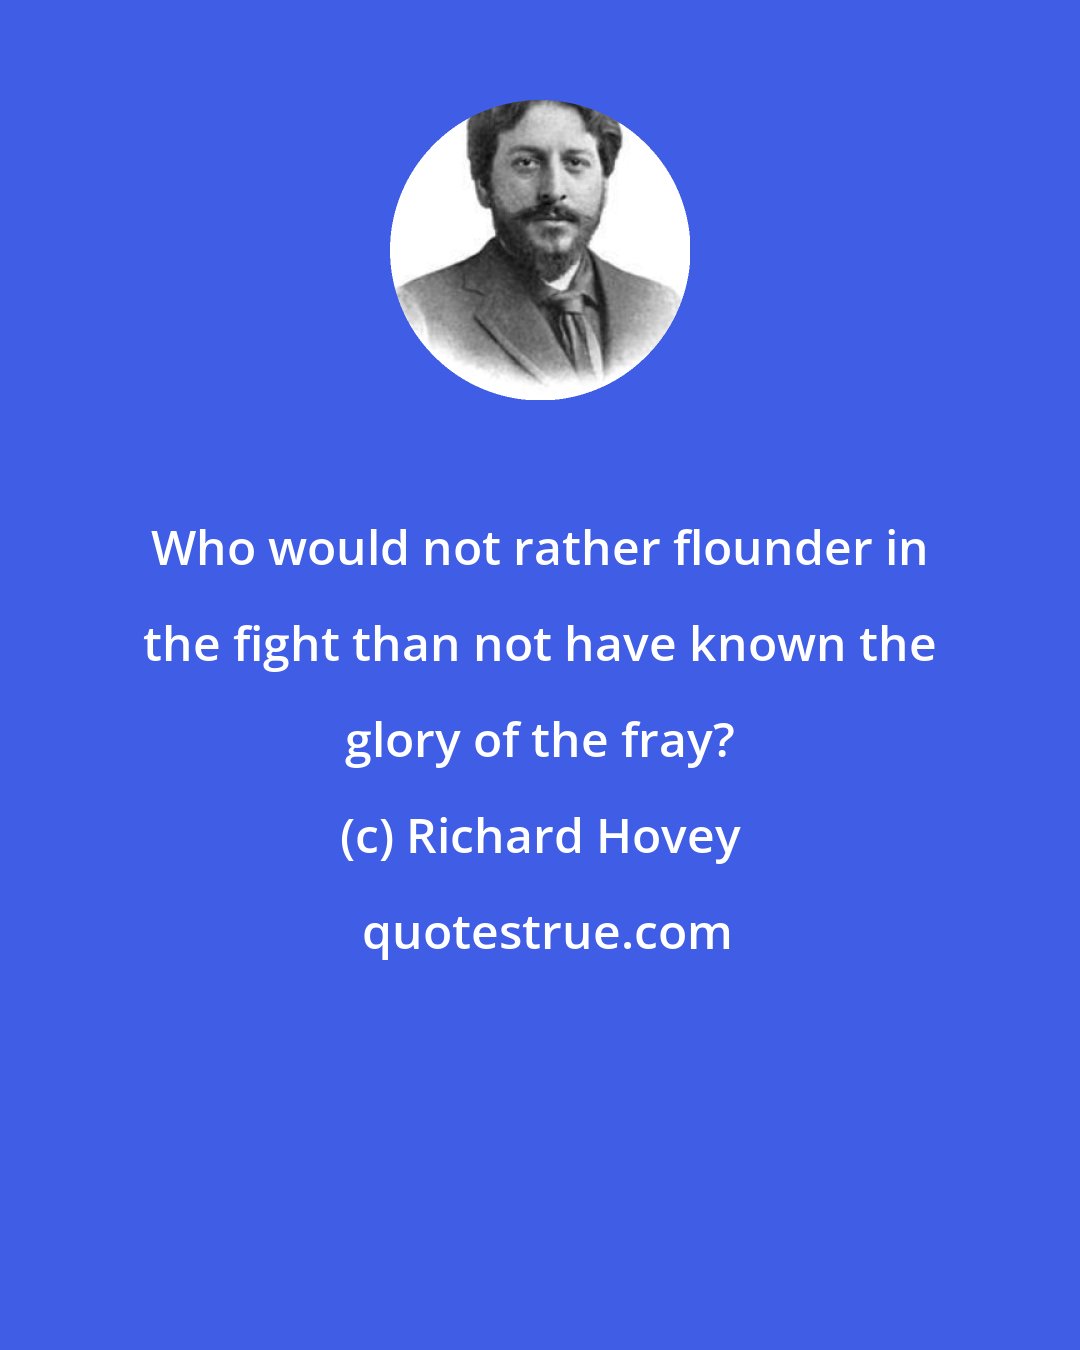 Richard Hovey: Who would not rather flounder in the fight than not have known the glory of the fray?